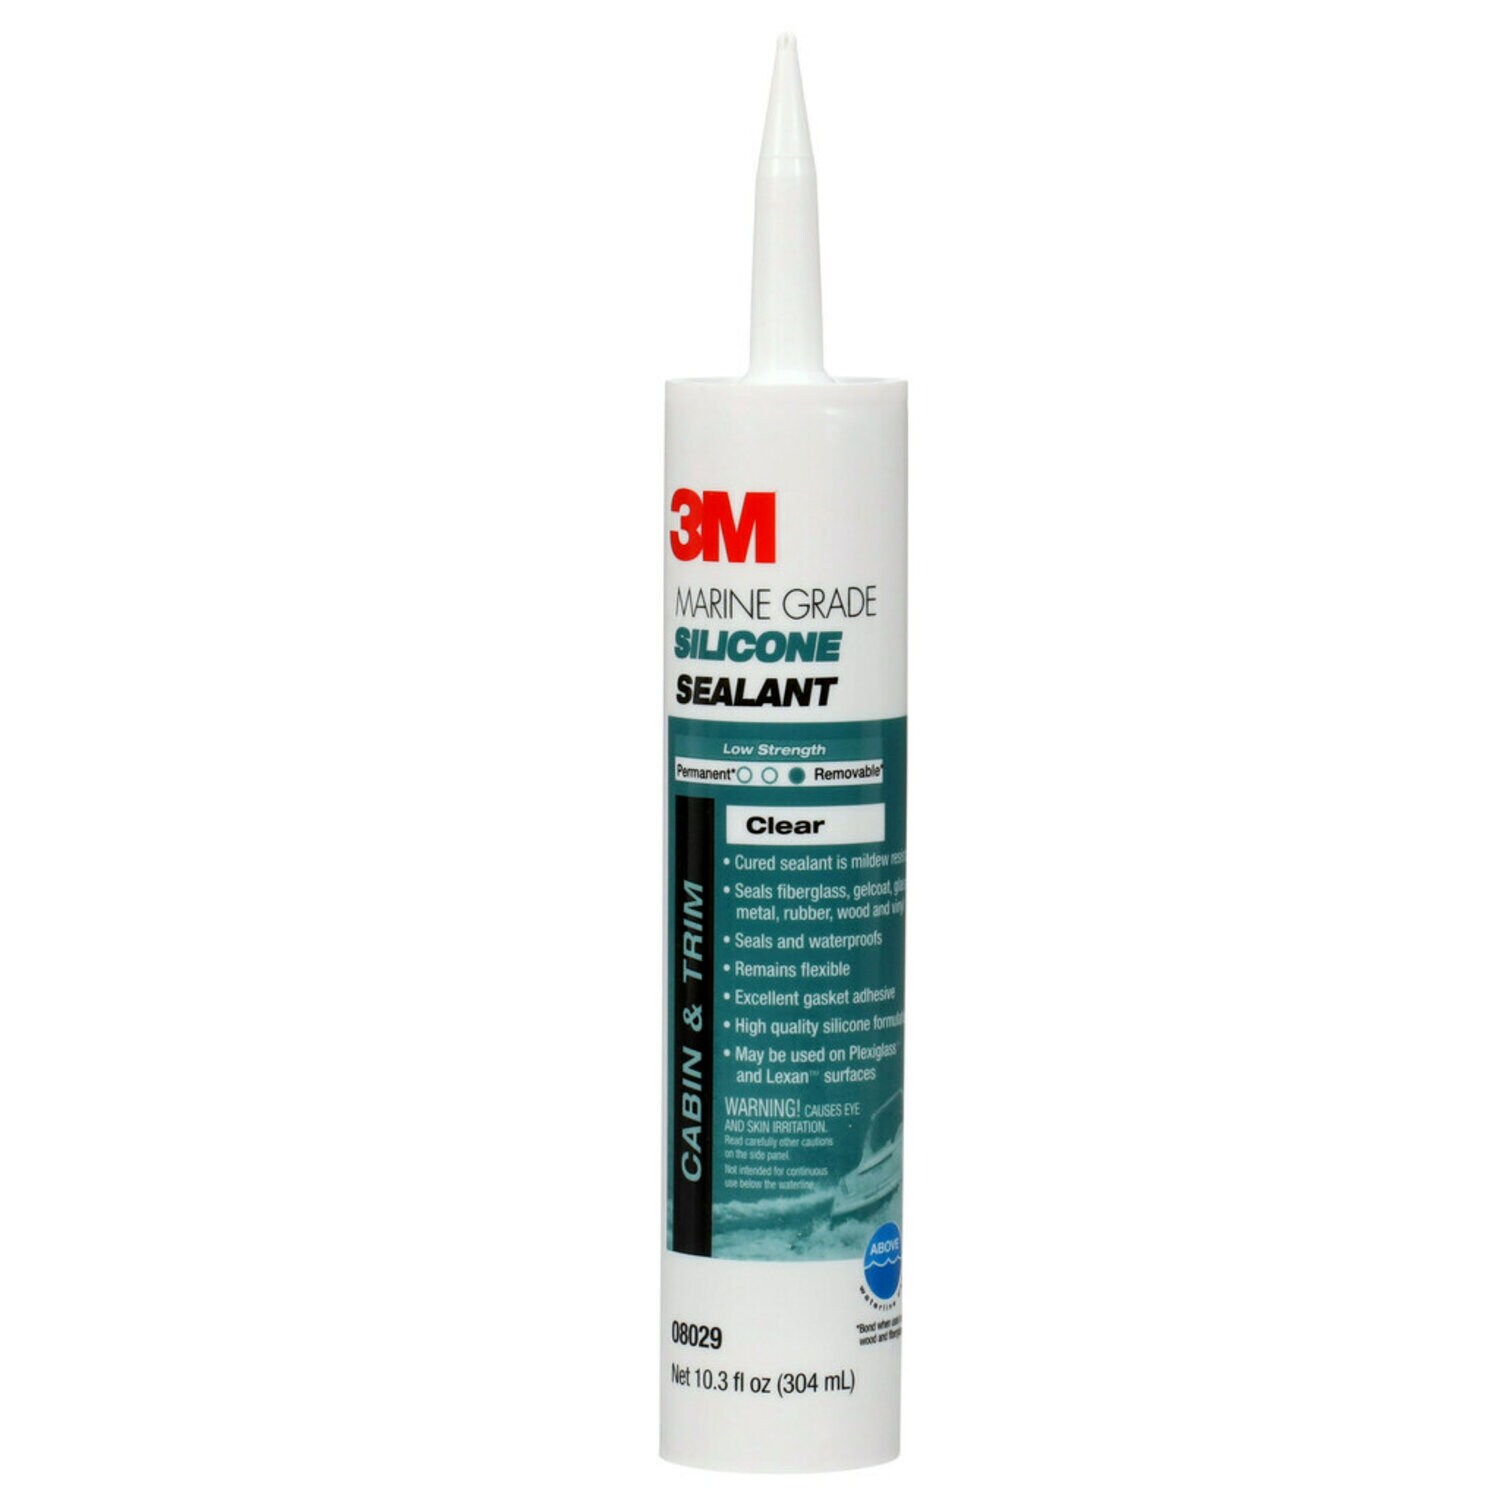 00051135080290, 3M Marine Grade Silicone Sealant, Clear, 304 mL  Cartridge, 12/Case, Aircraft products, silicone-sealants